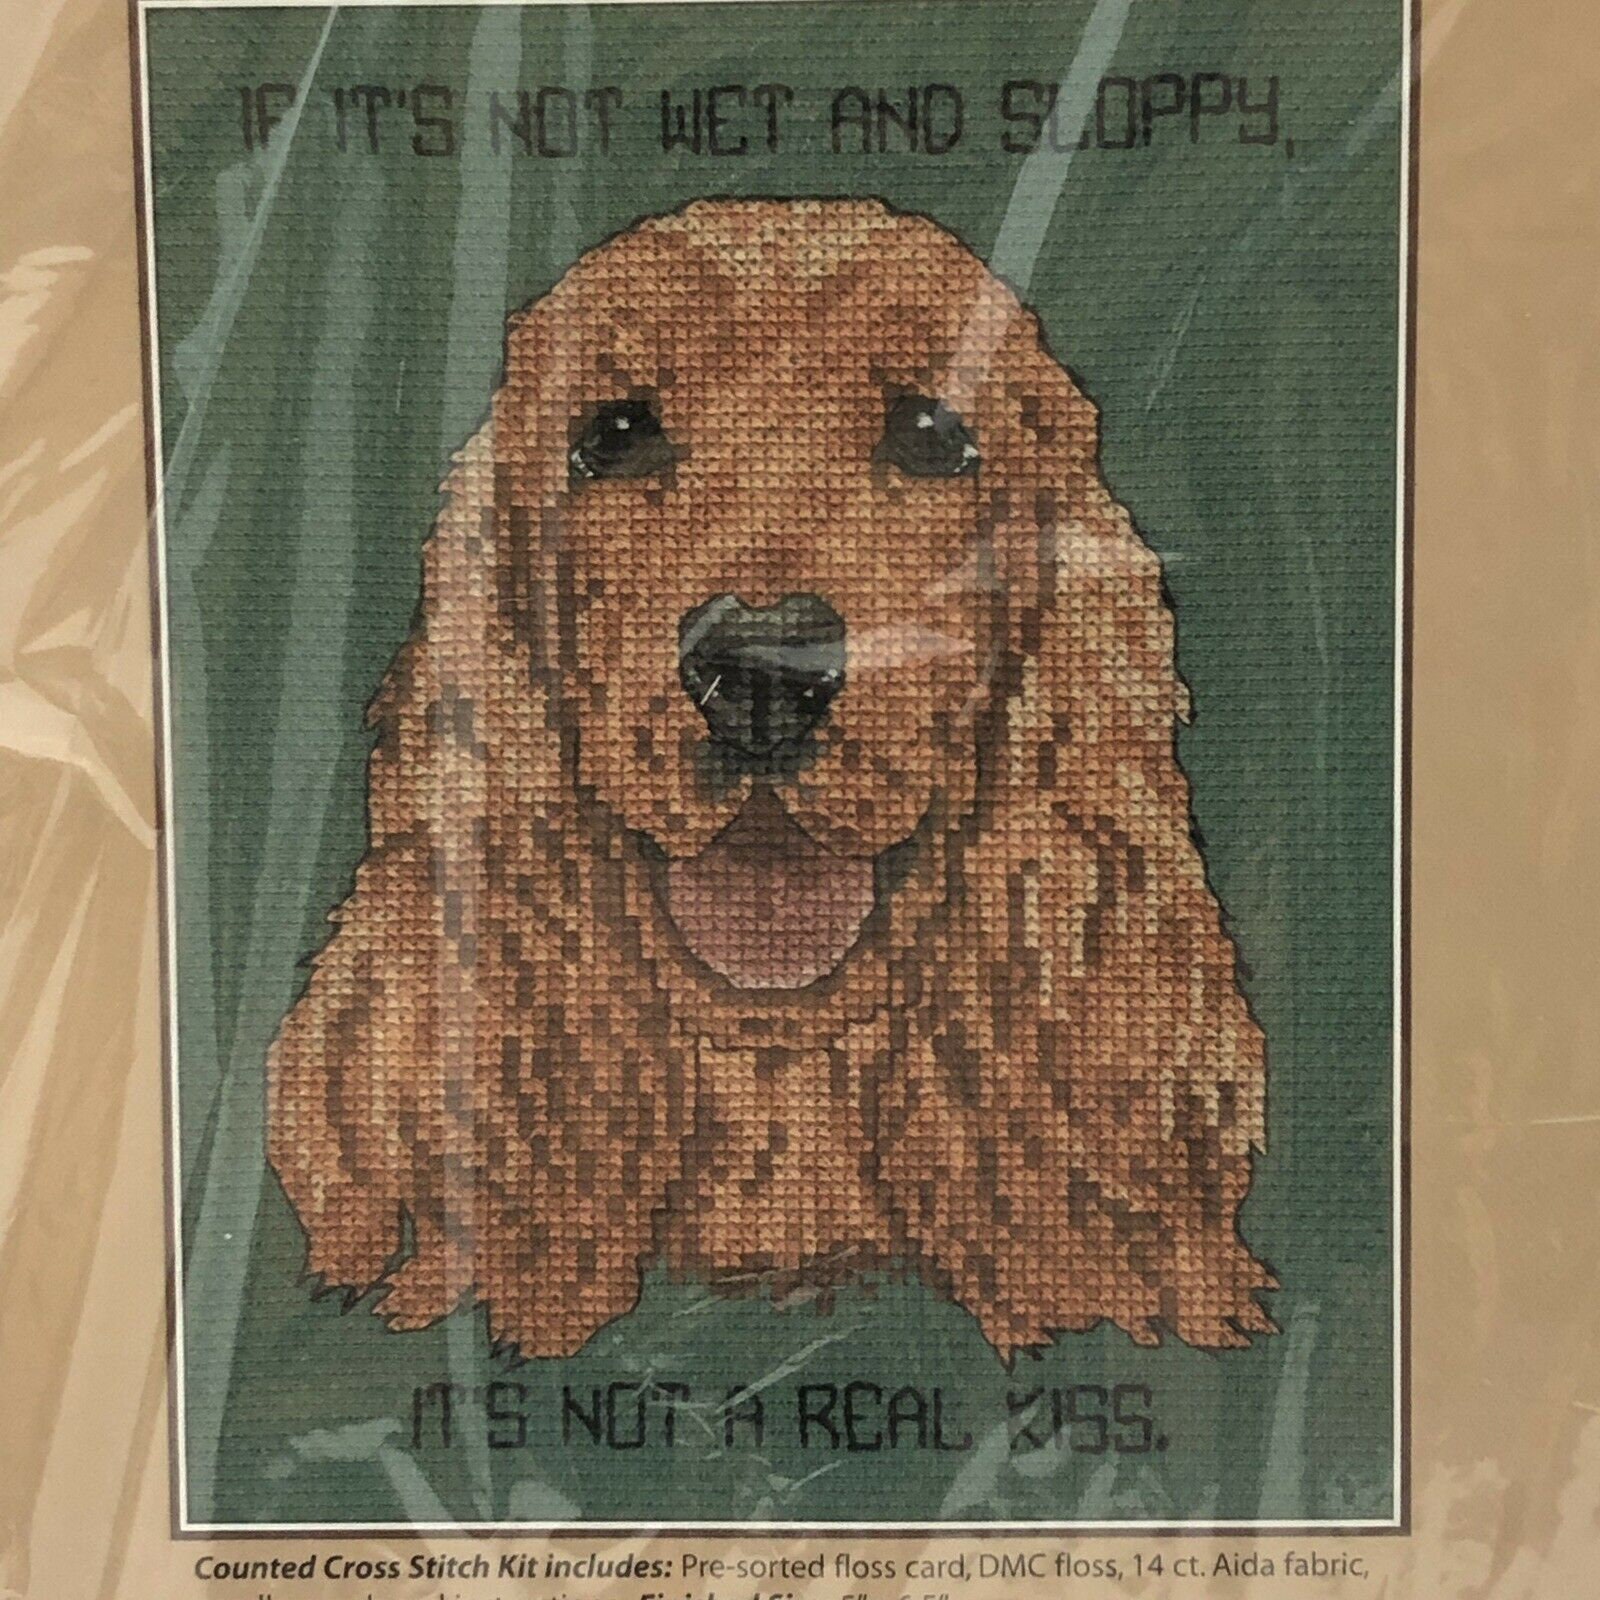 Needlepoint Cocker Spaniel Pillow' by CT